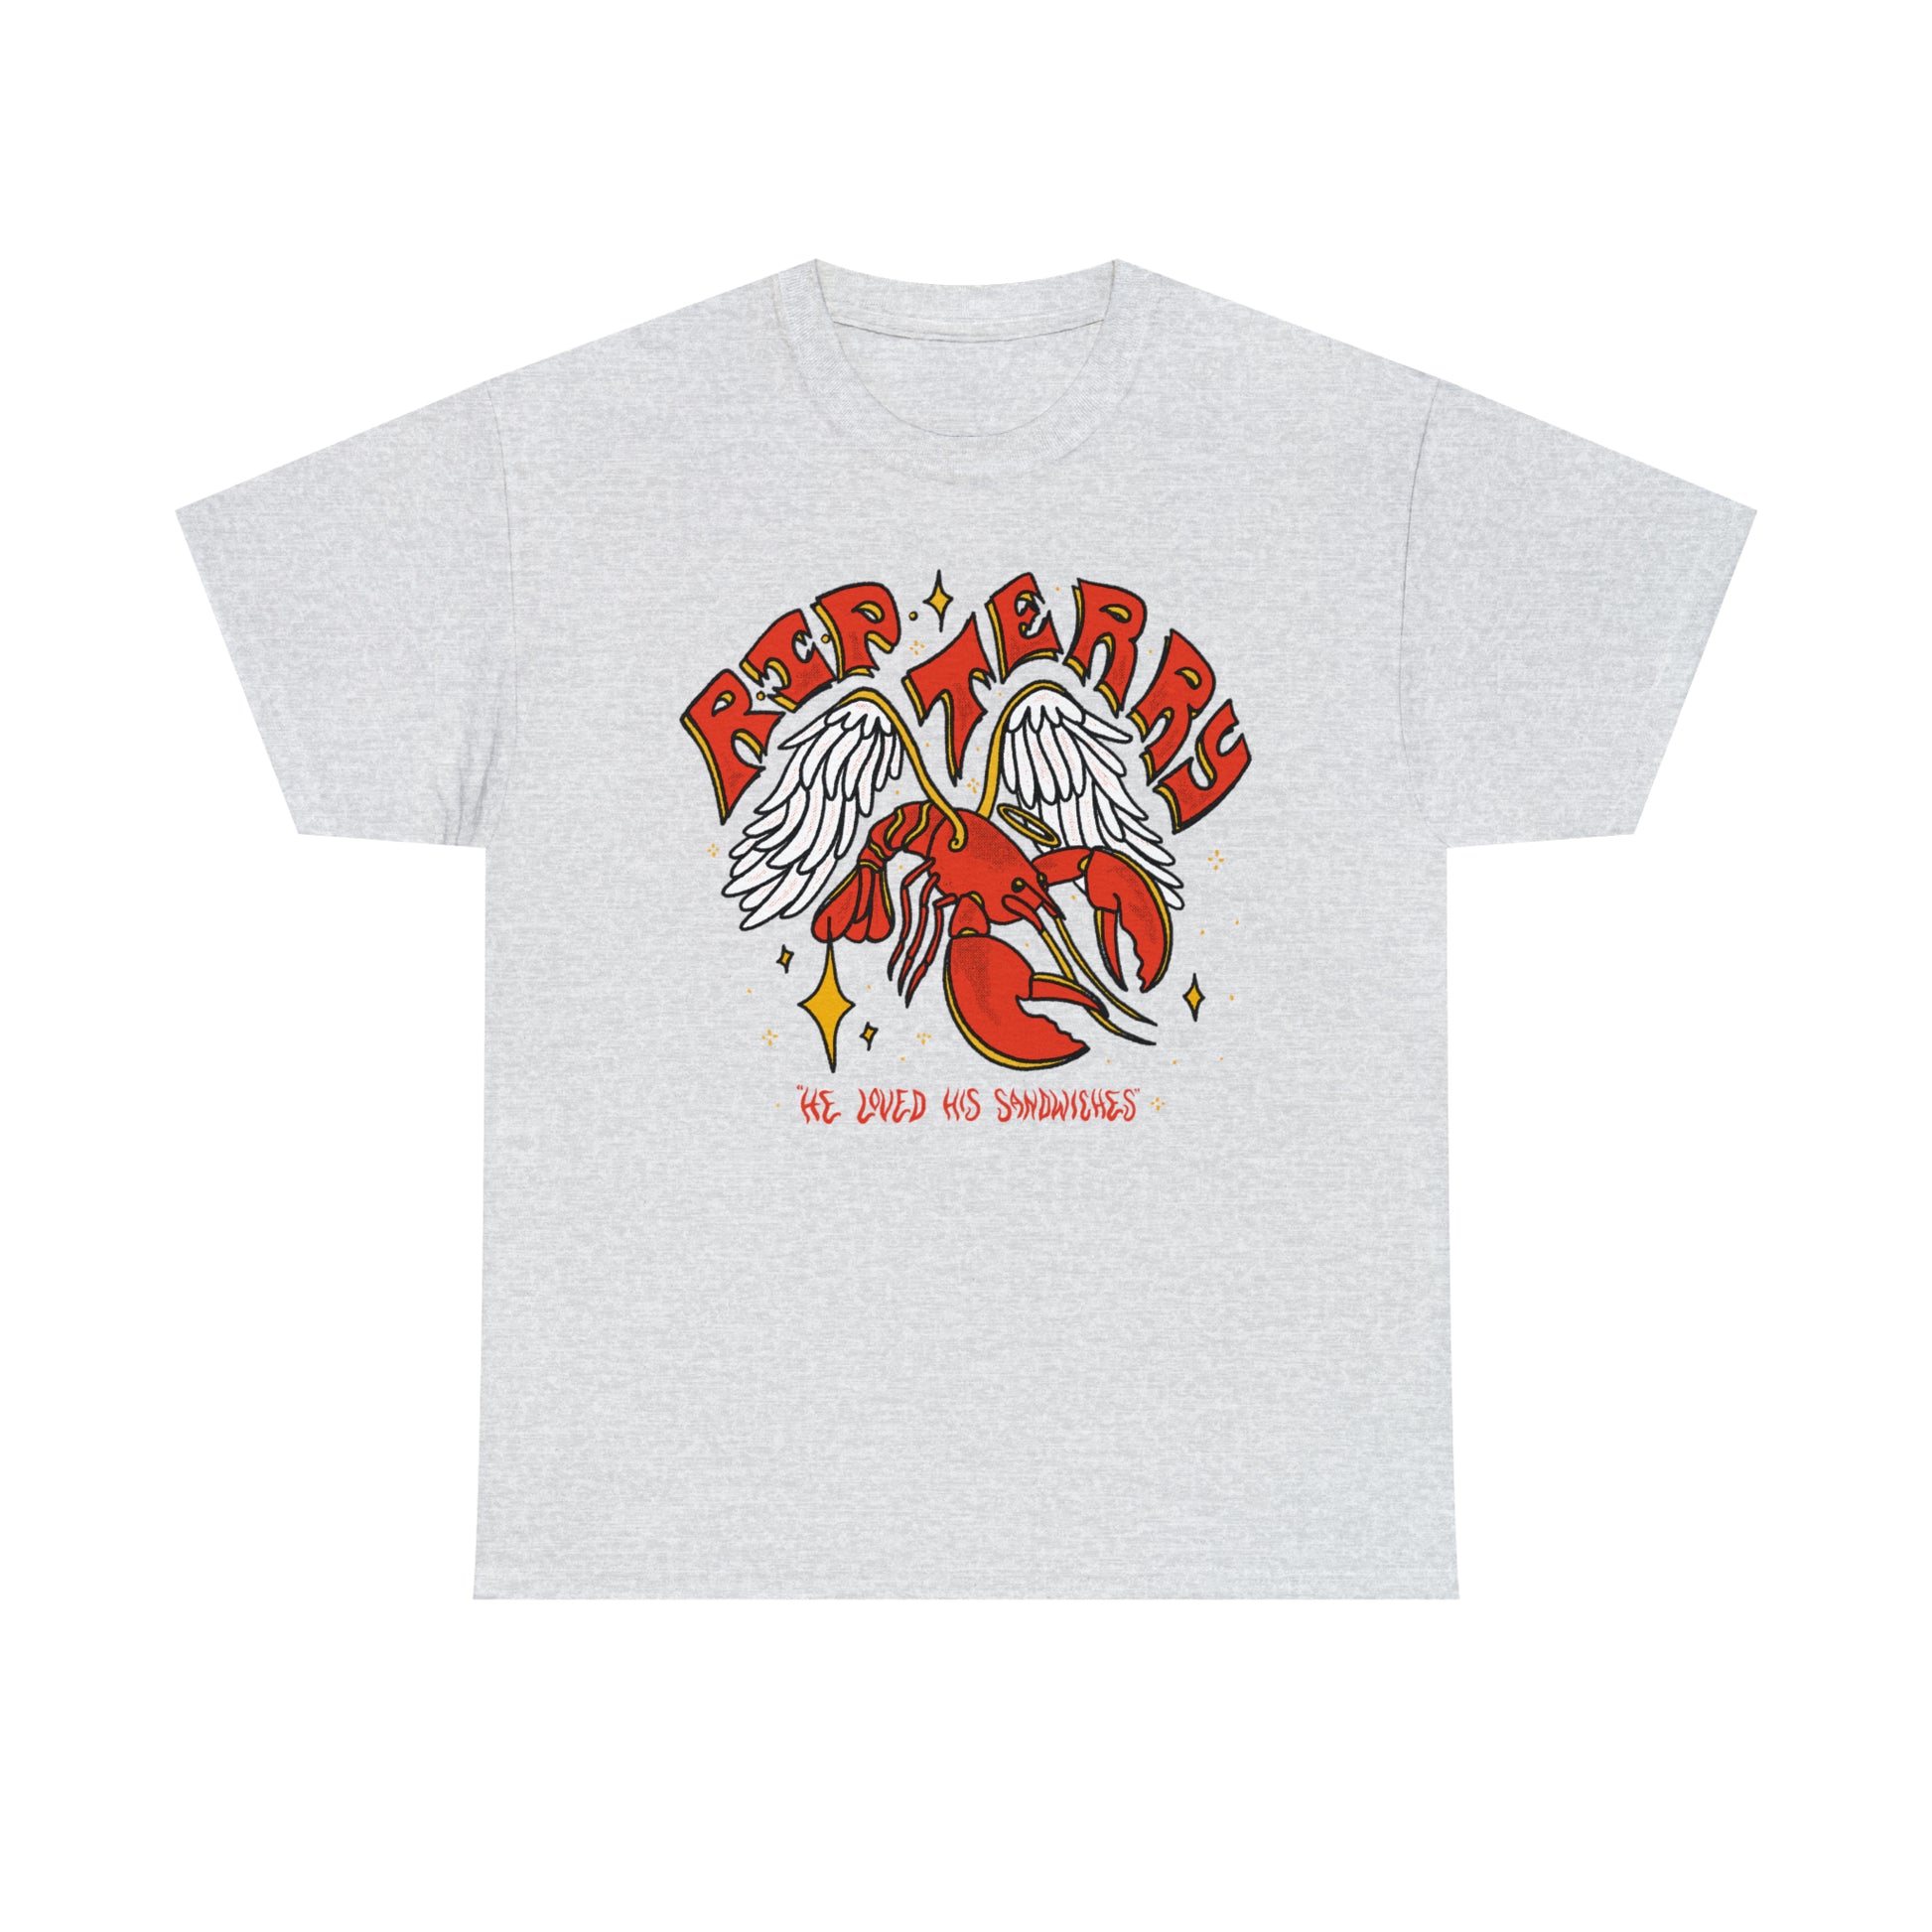 Lobster - Long Sleeve T-Shirt Small / White